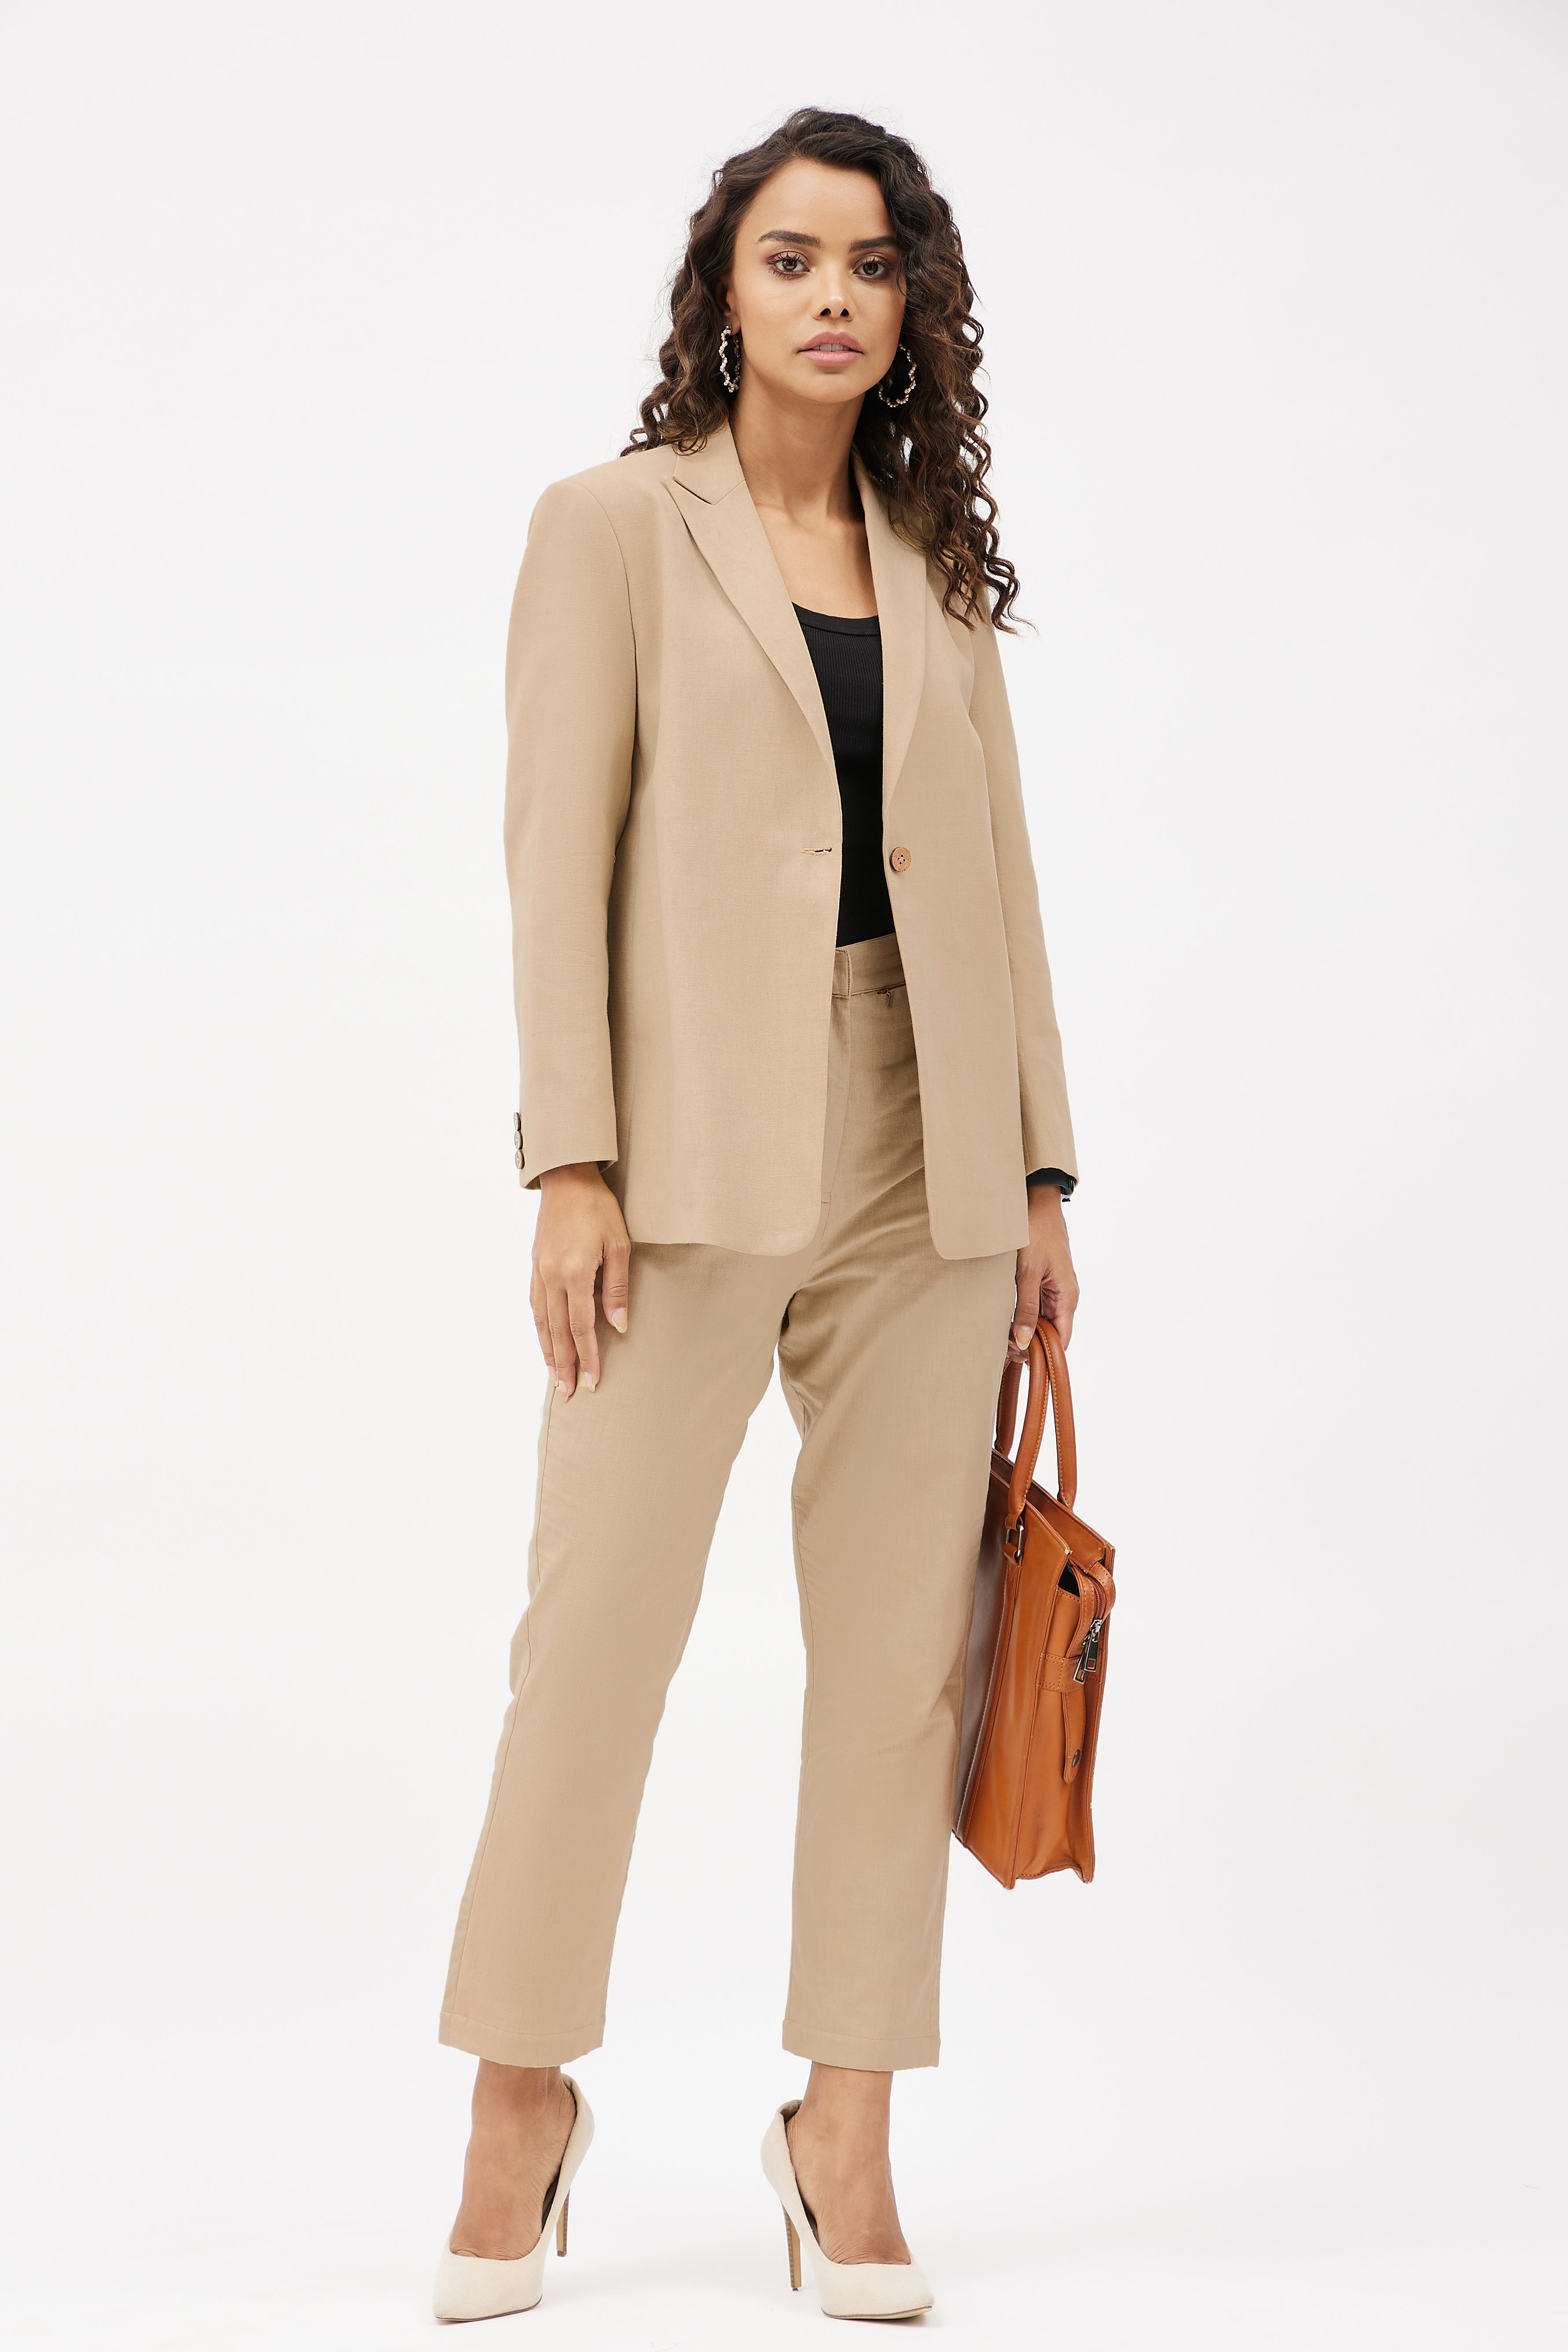 Zara highwaist trousers  Steffys Style  Business outfits women Work  outfit Classy work outfits